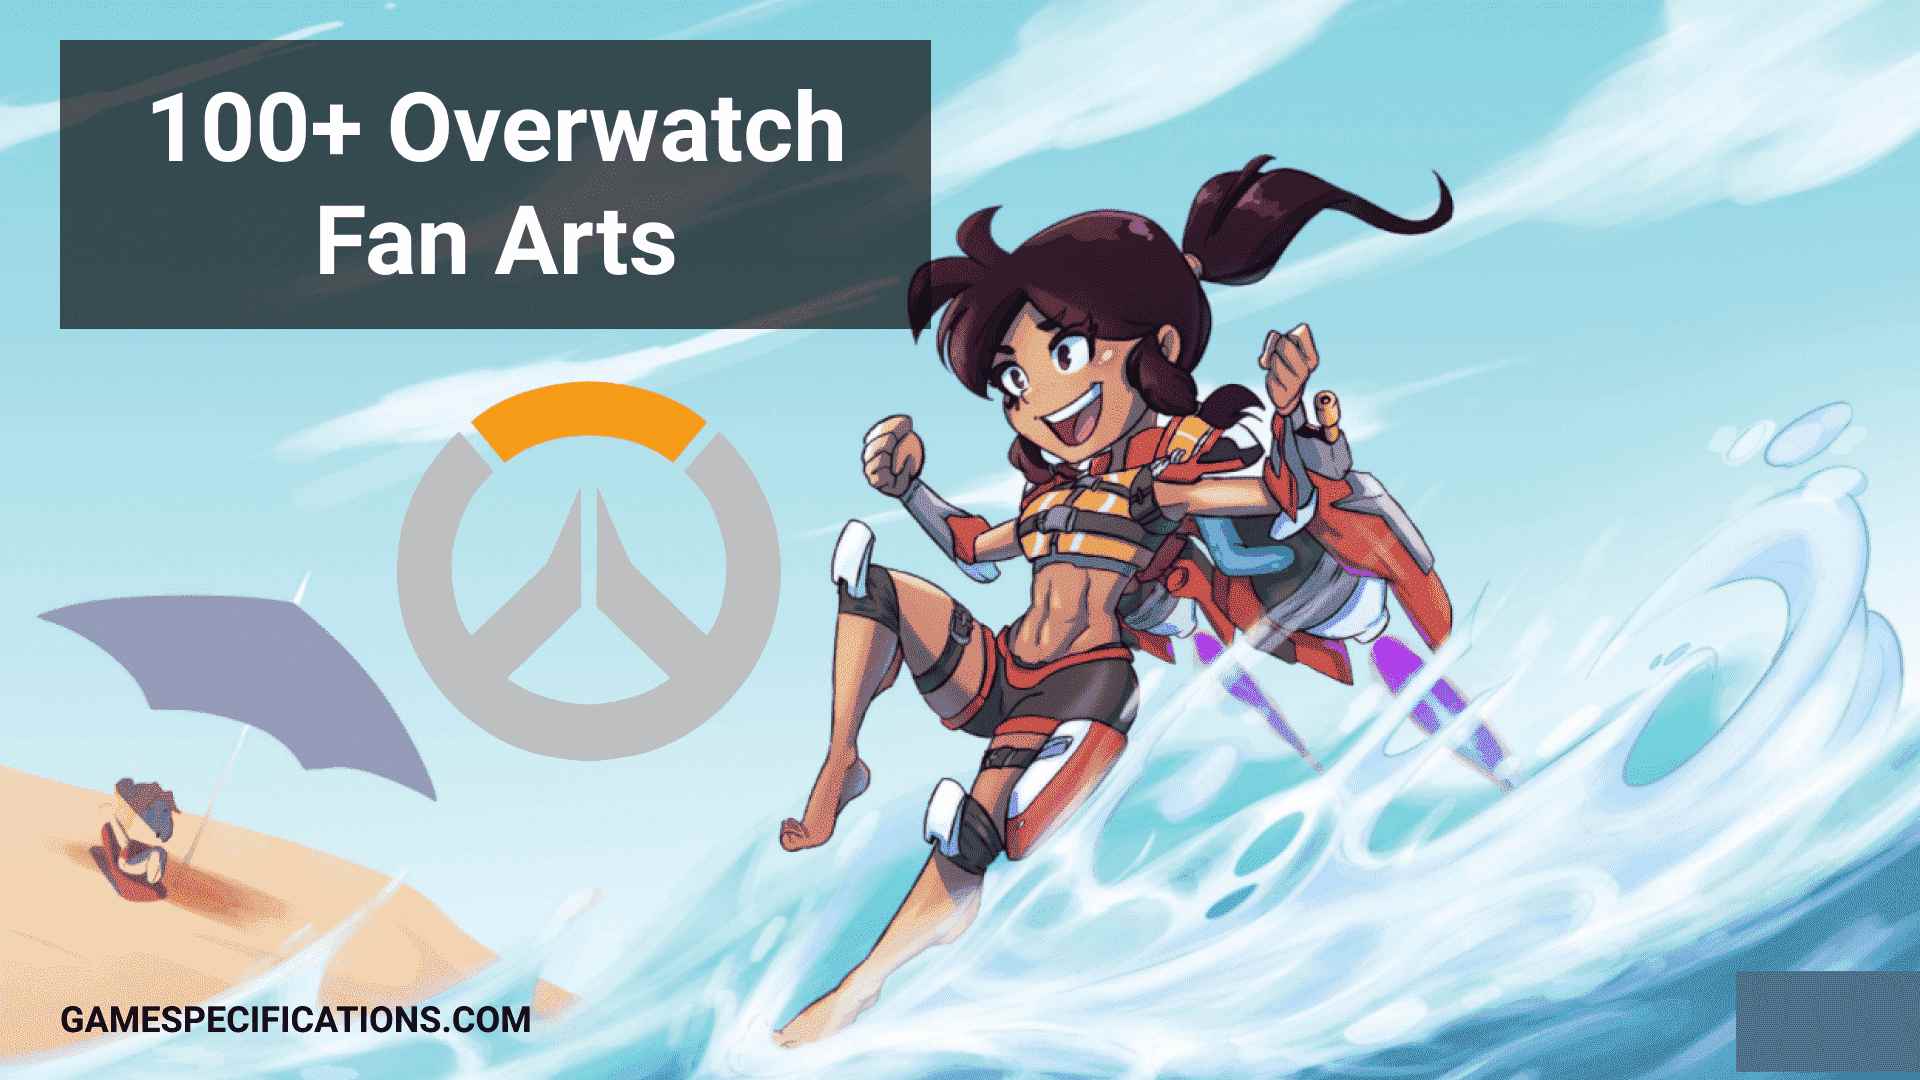 100+ Overwatch Fan Art Images To Amaze Your Mind!